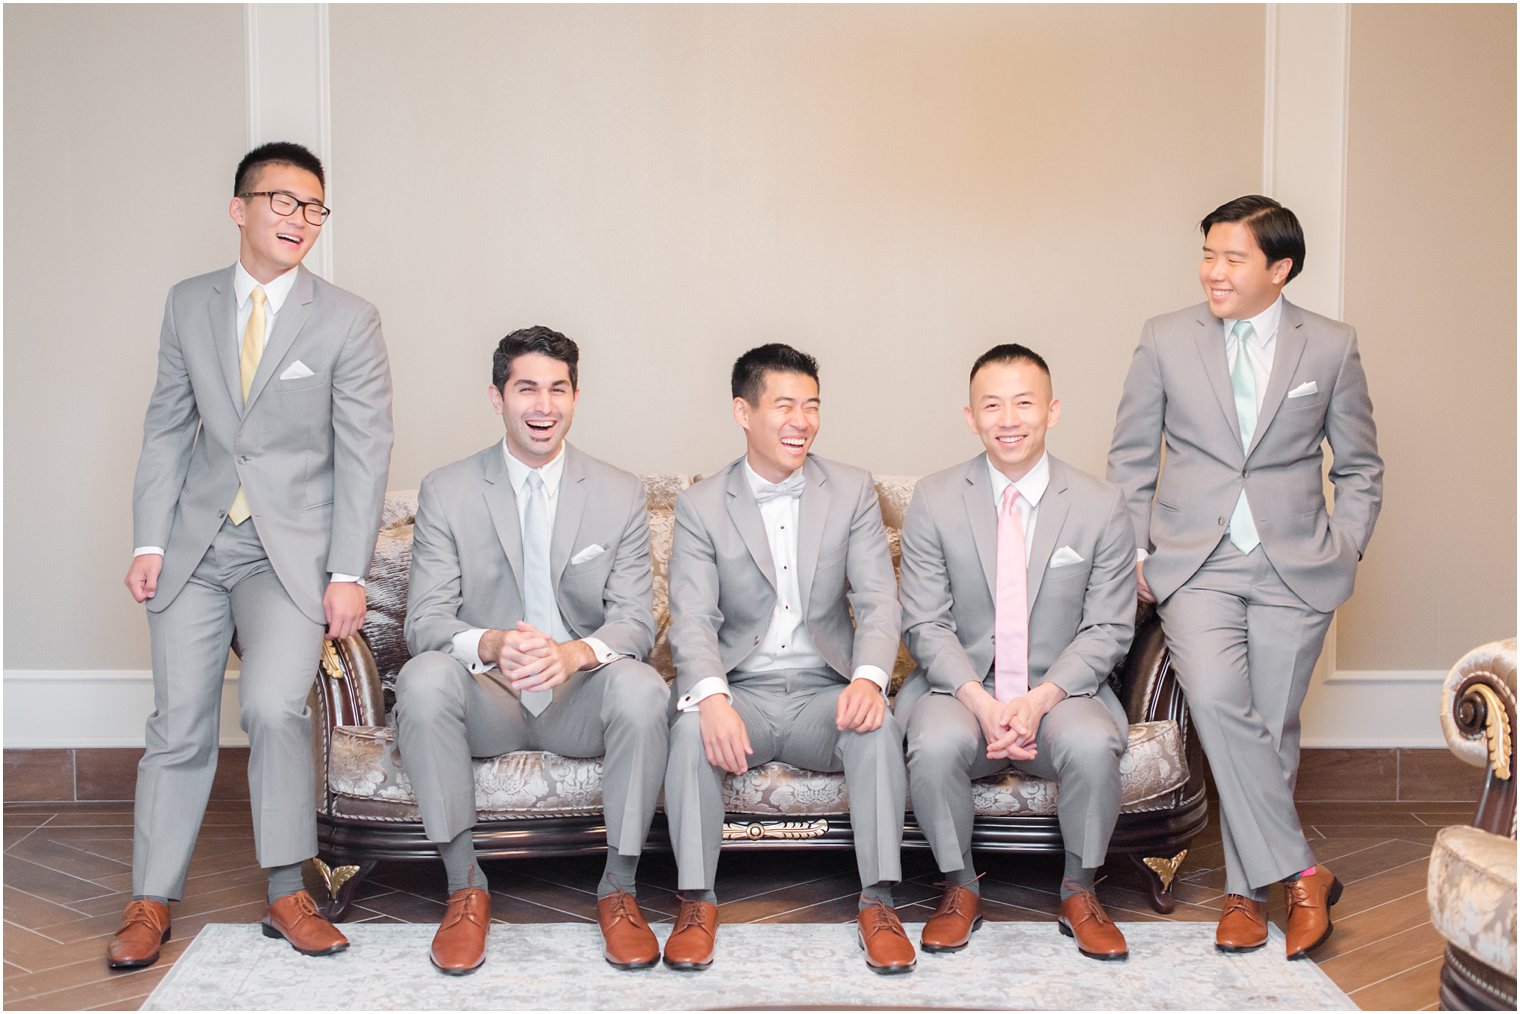 Groom and groomsmen in grey suits with pastel ties from Men's Wearhouse photographed by NJ wedding photographer Idalia Photography